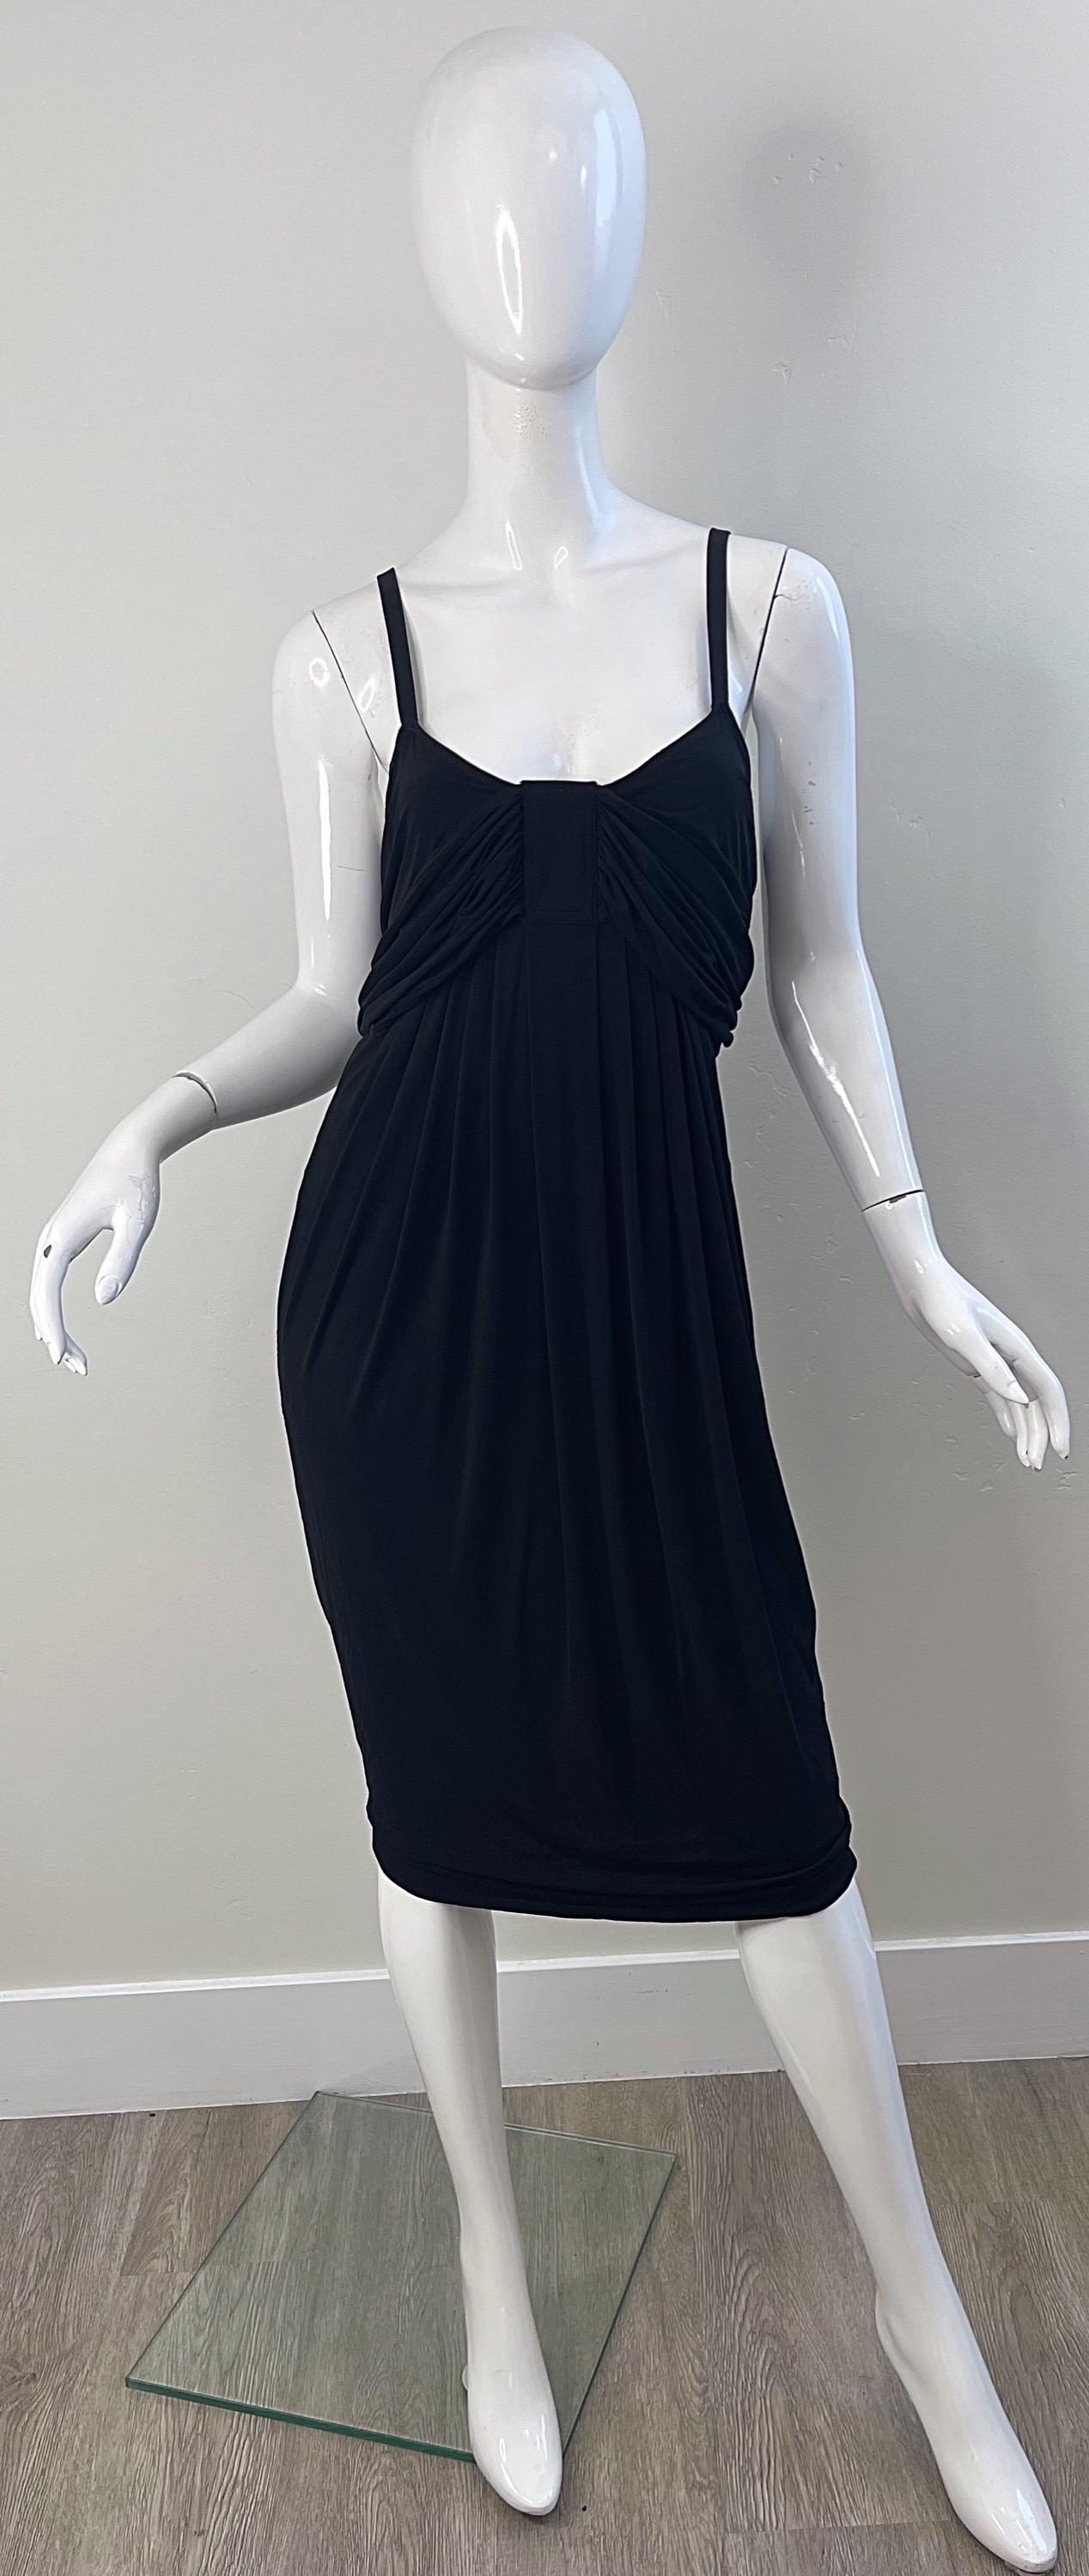 New with tags early 2000s DONNA KARAN Collection black cupo and spandex jersey sleeveless dress ! Retailed for $2,295. Simply slips over the head and stretches to fit. The perfect little black dress that is a timeless addition to any wardrobe.